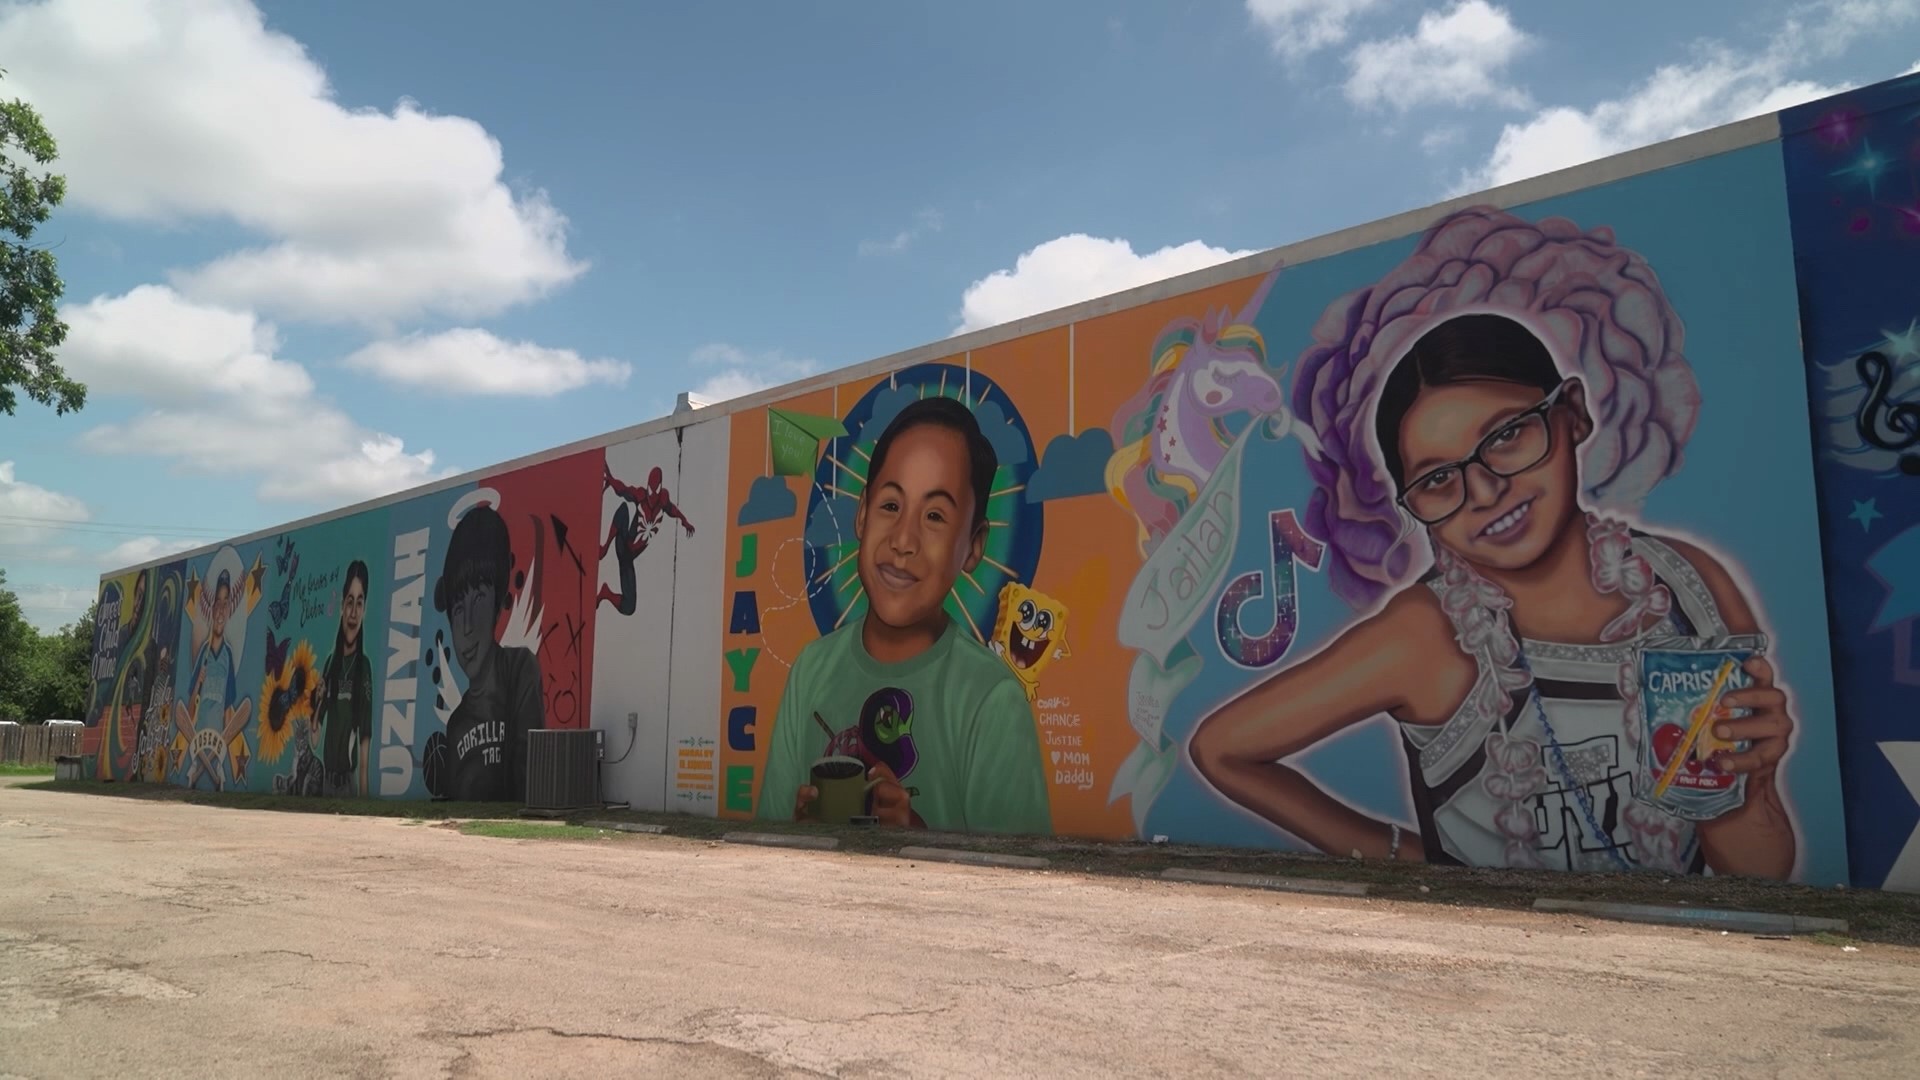 Uvalde artist Abel Ortiz commissioned the entire mural project nearly a year ago to honor the lives lost in the tragedy at Robb Elementary School.